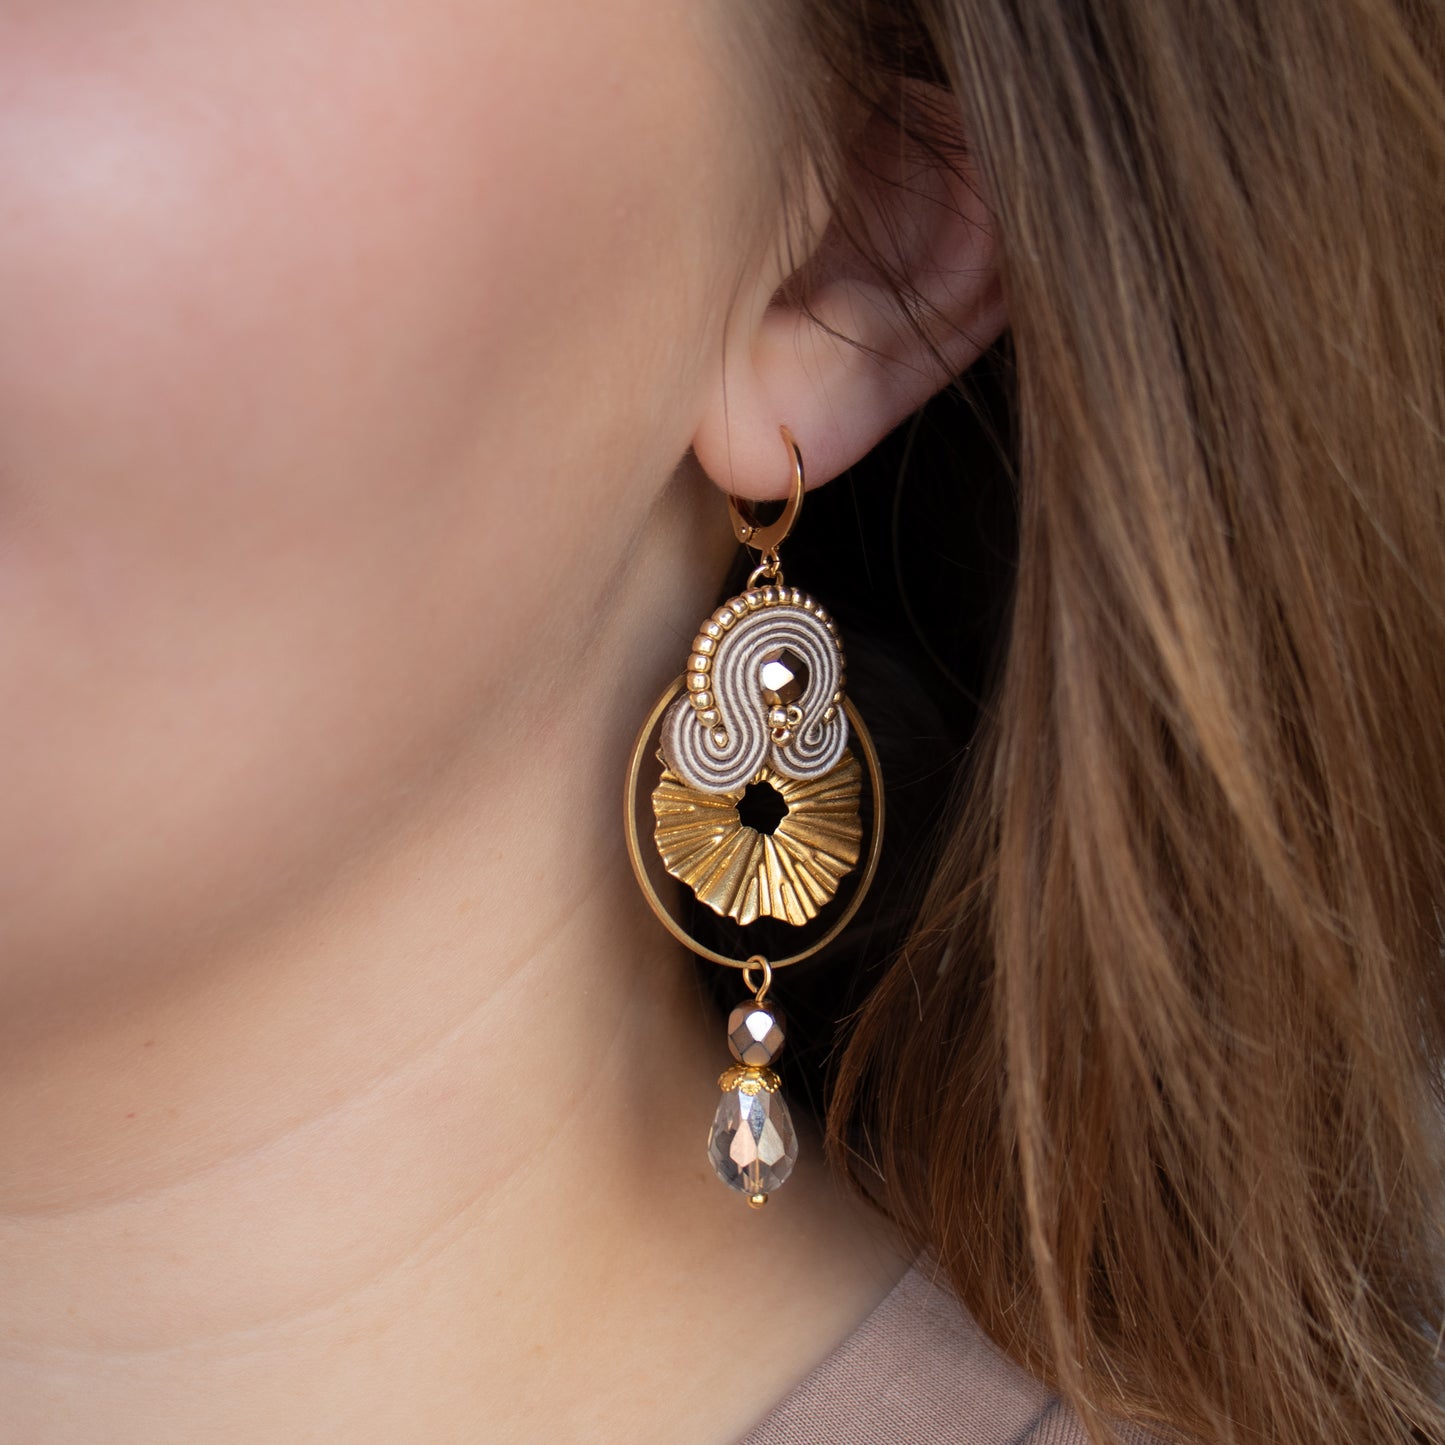 Sand soutache earrings. Unique handmade earrings with gold charms.